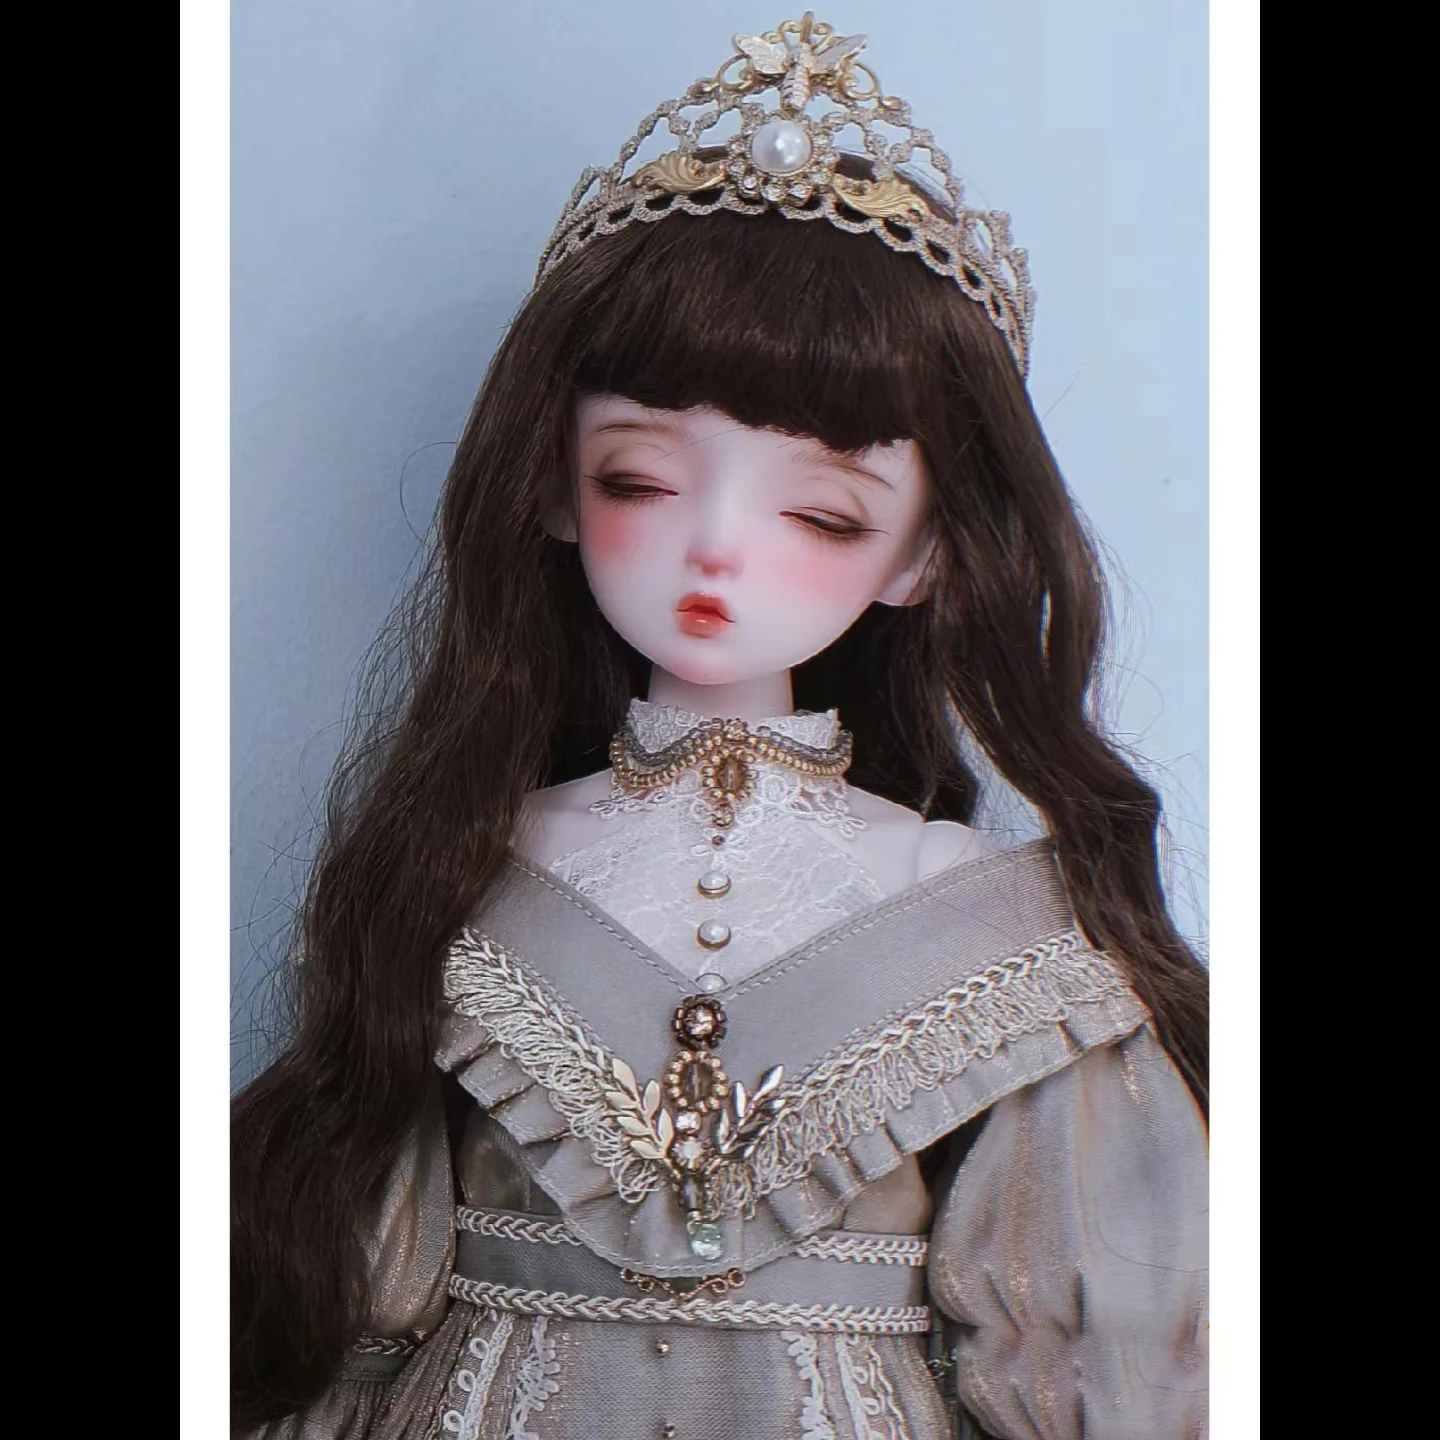 

New Arrival 1/3 BJD Doll Resin Material Lovely Sleeping Girl Doll Head With Body No Makeup Doll Gifts For Girl Children Toy